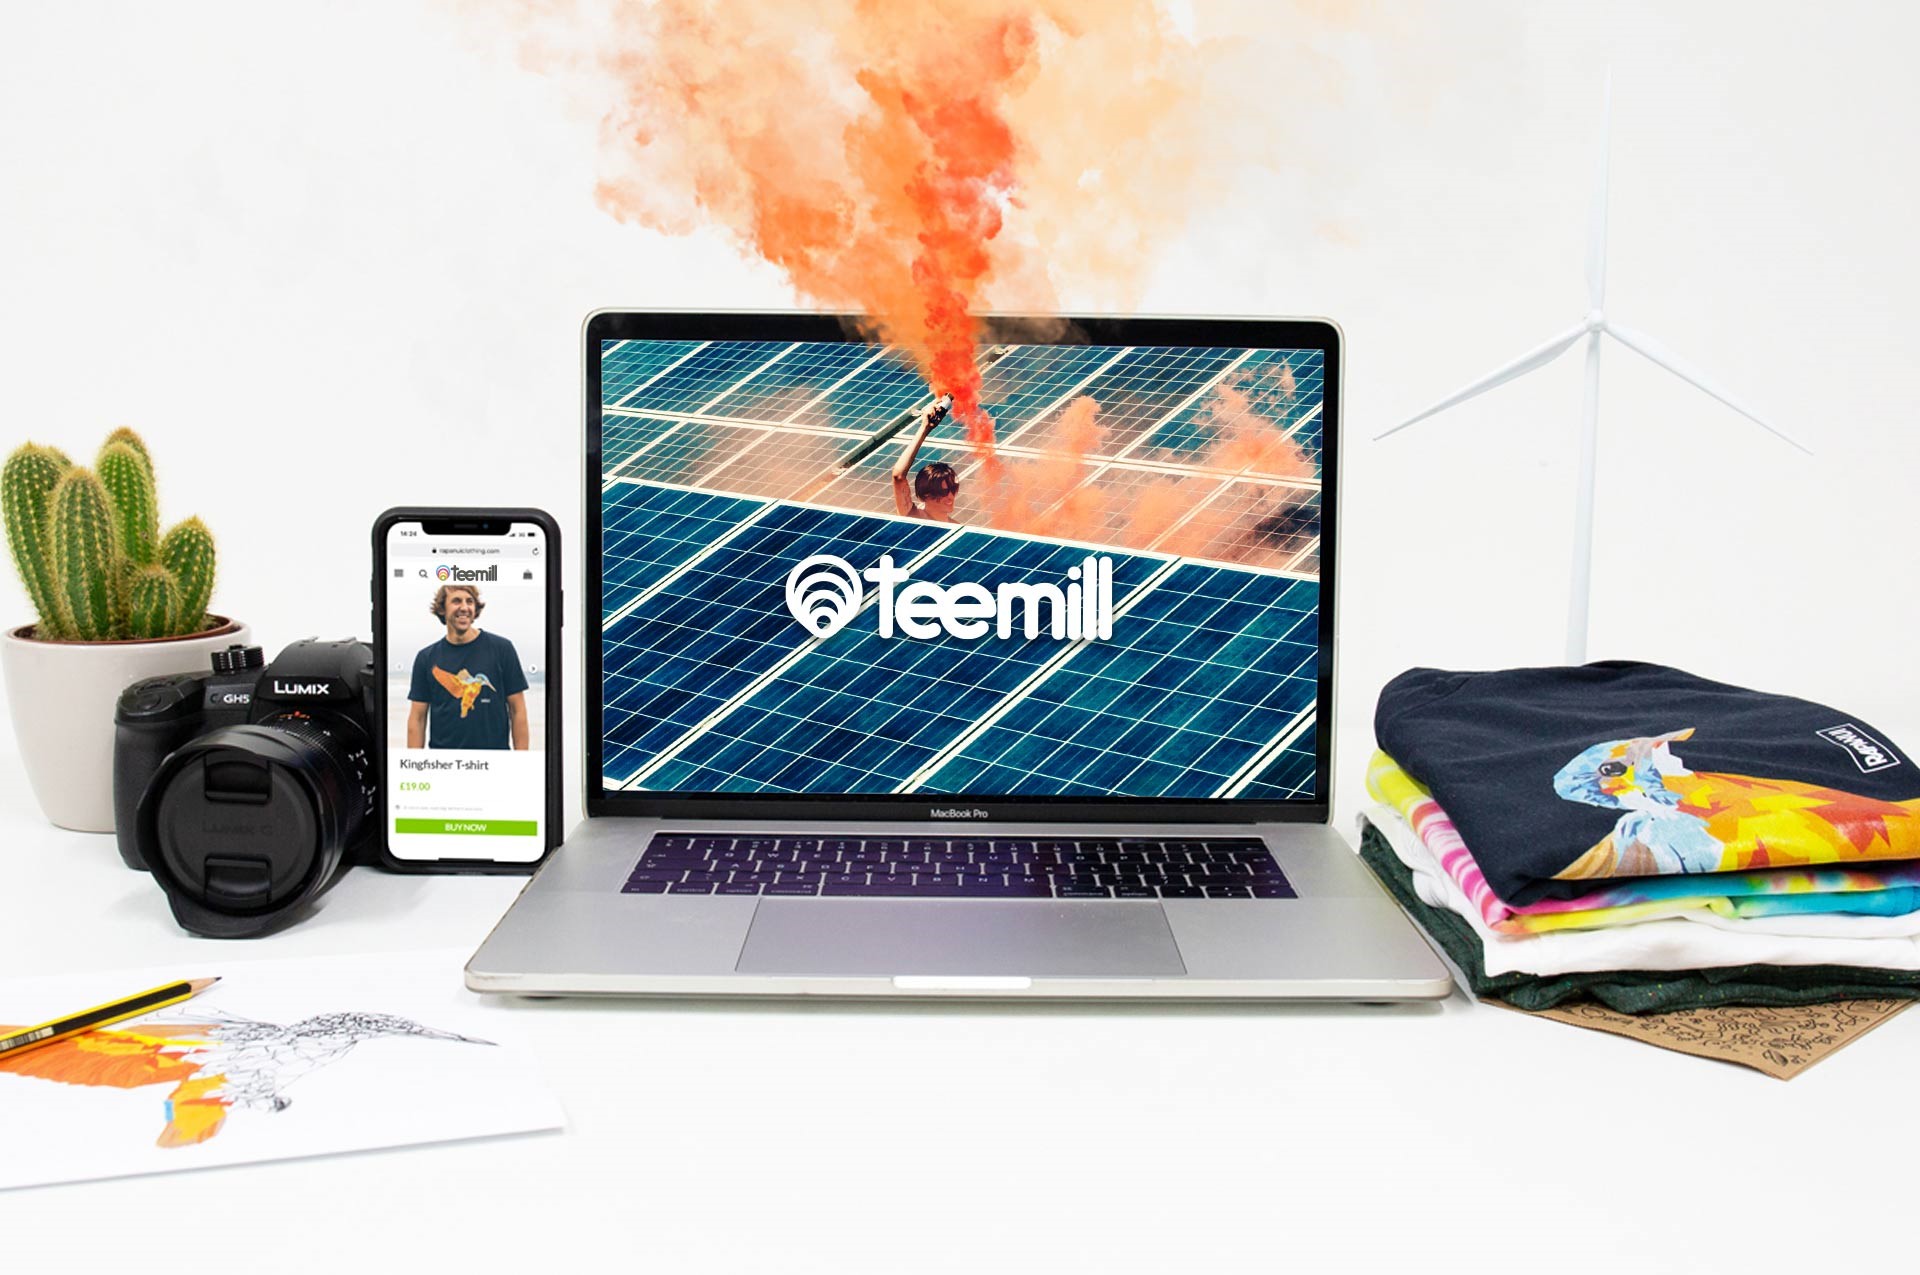 Computer featuring Teemill logo, t shirts, mobile phone and camera